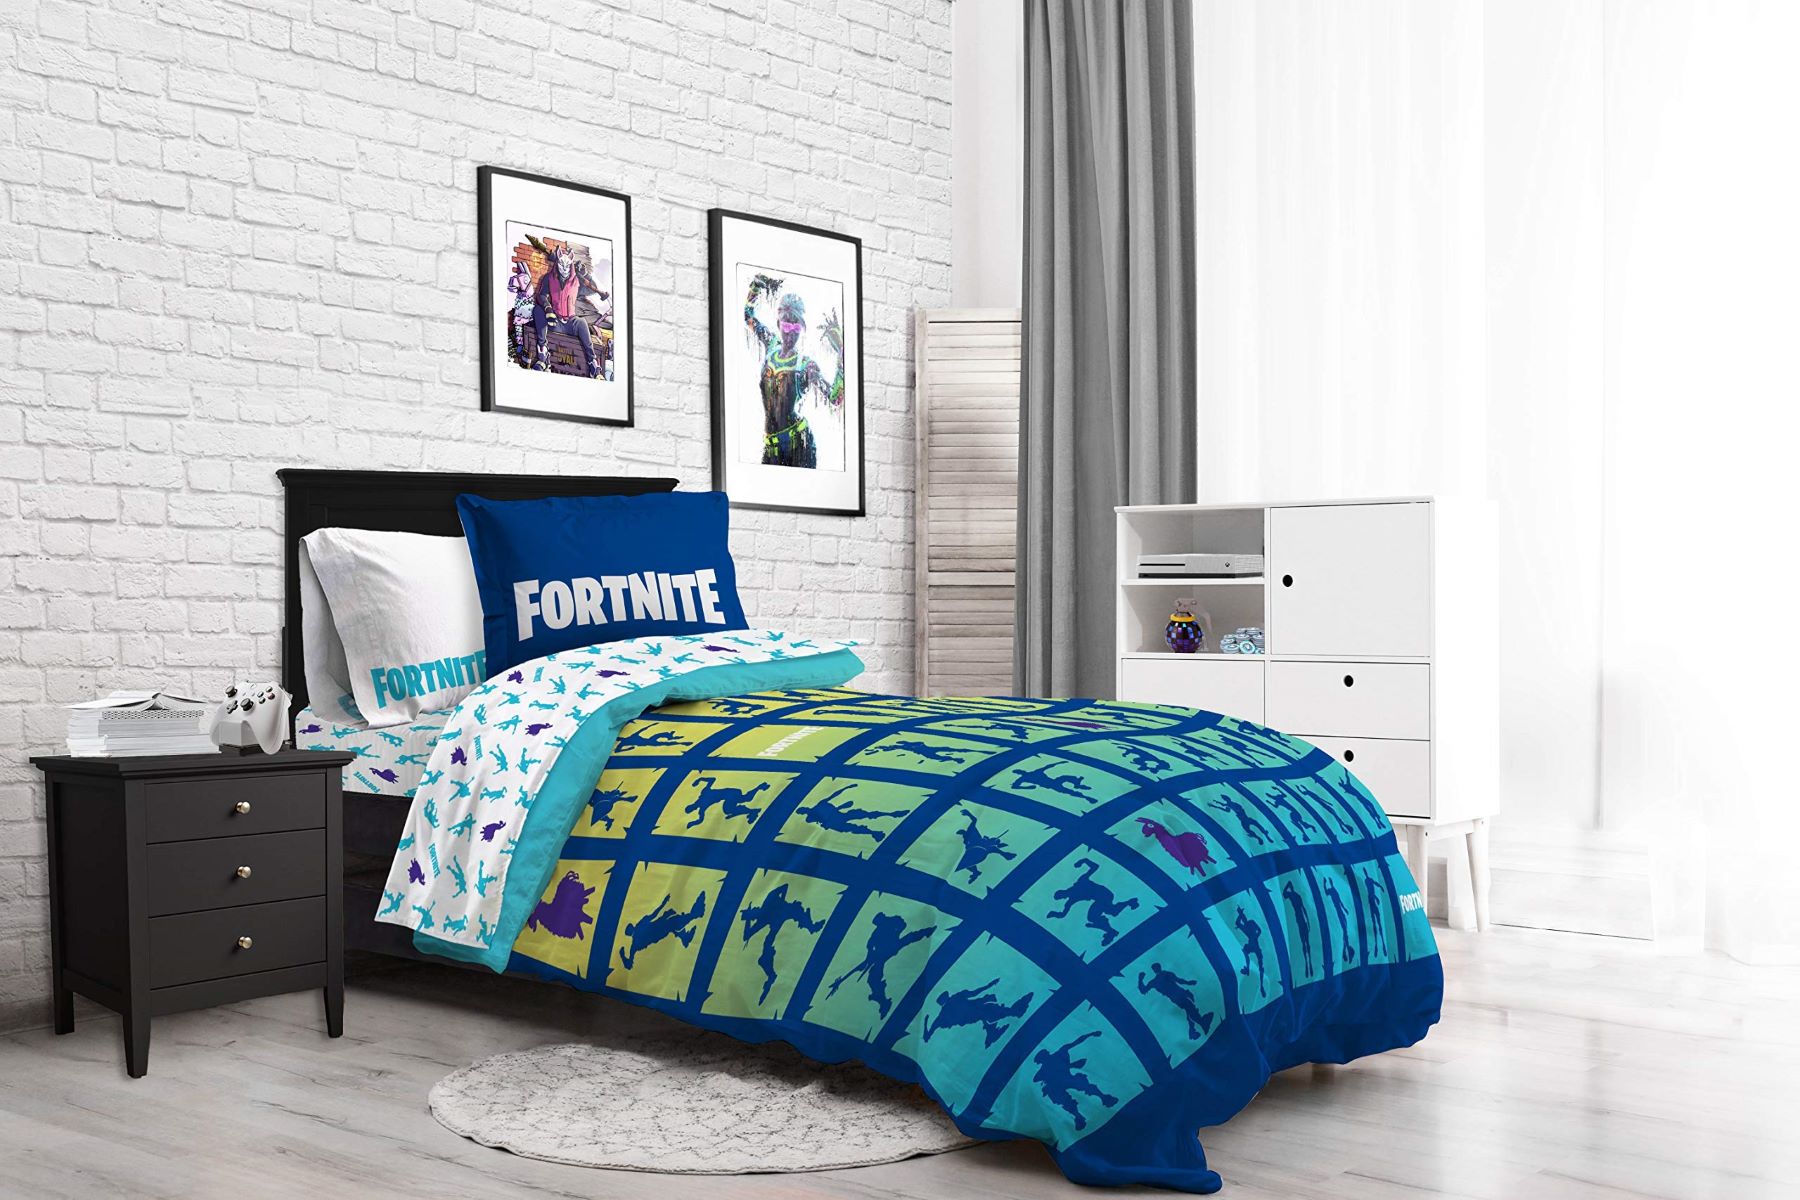 How to Create a Fortnite-Themed Bedroom